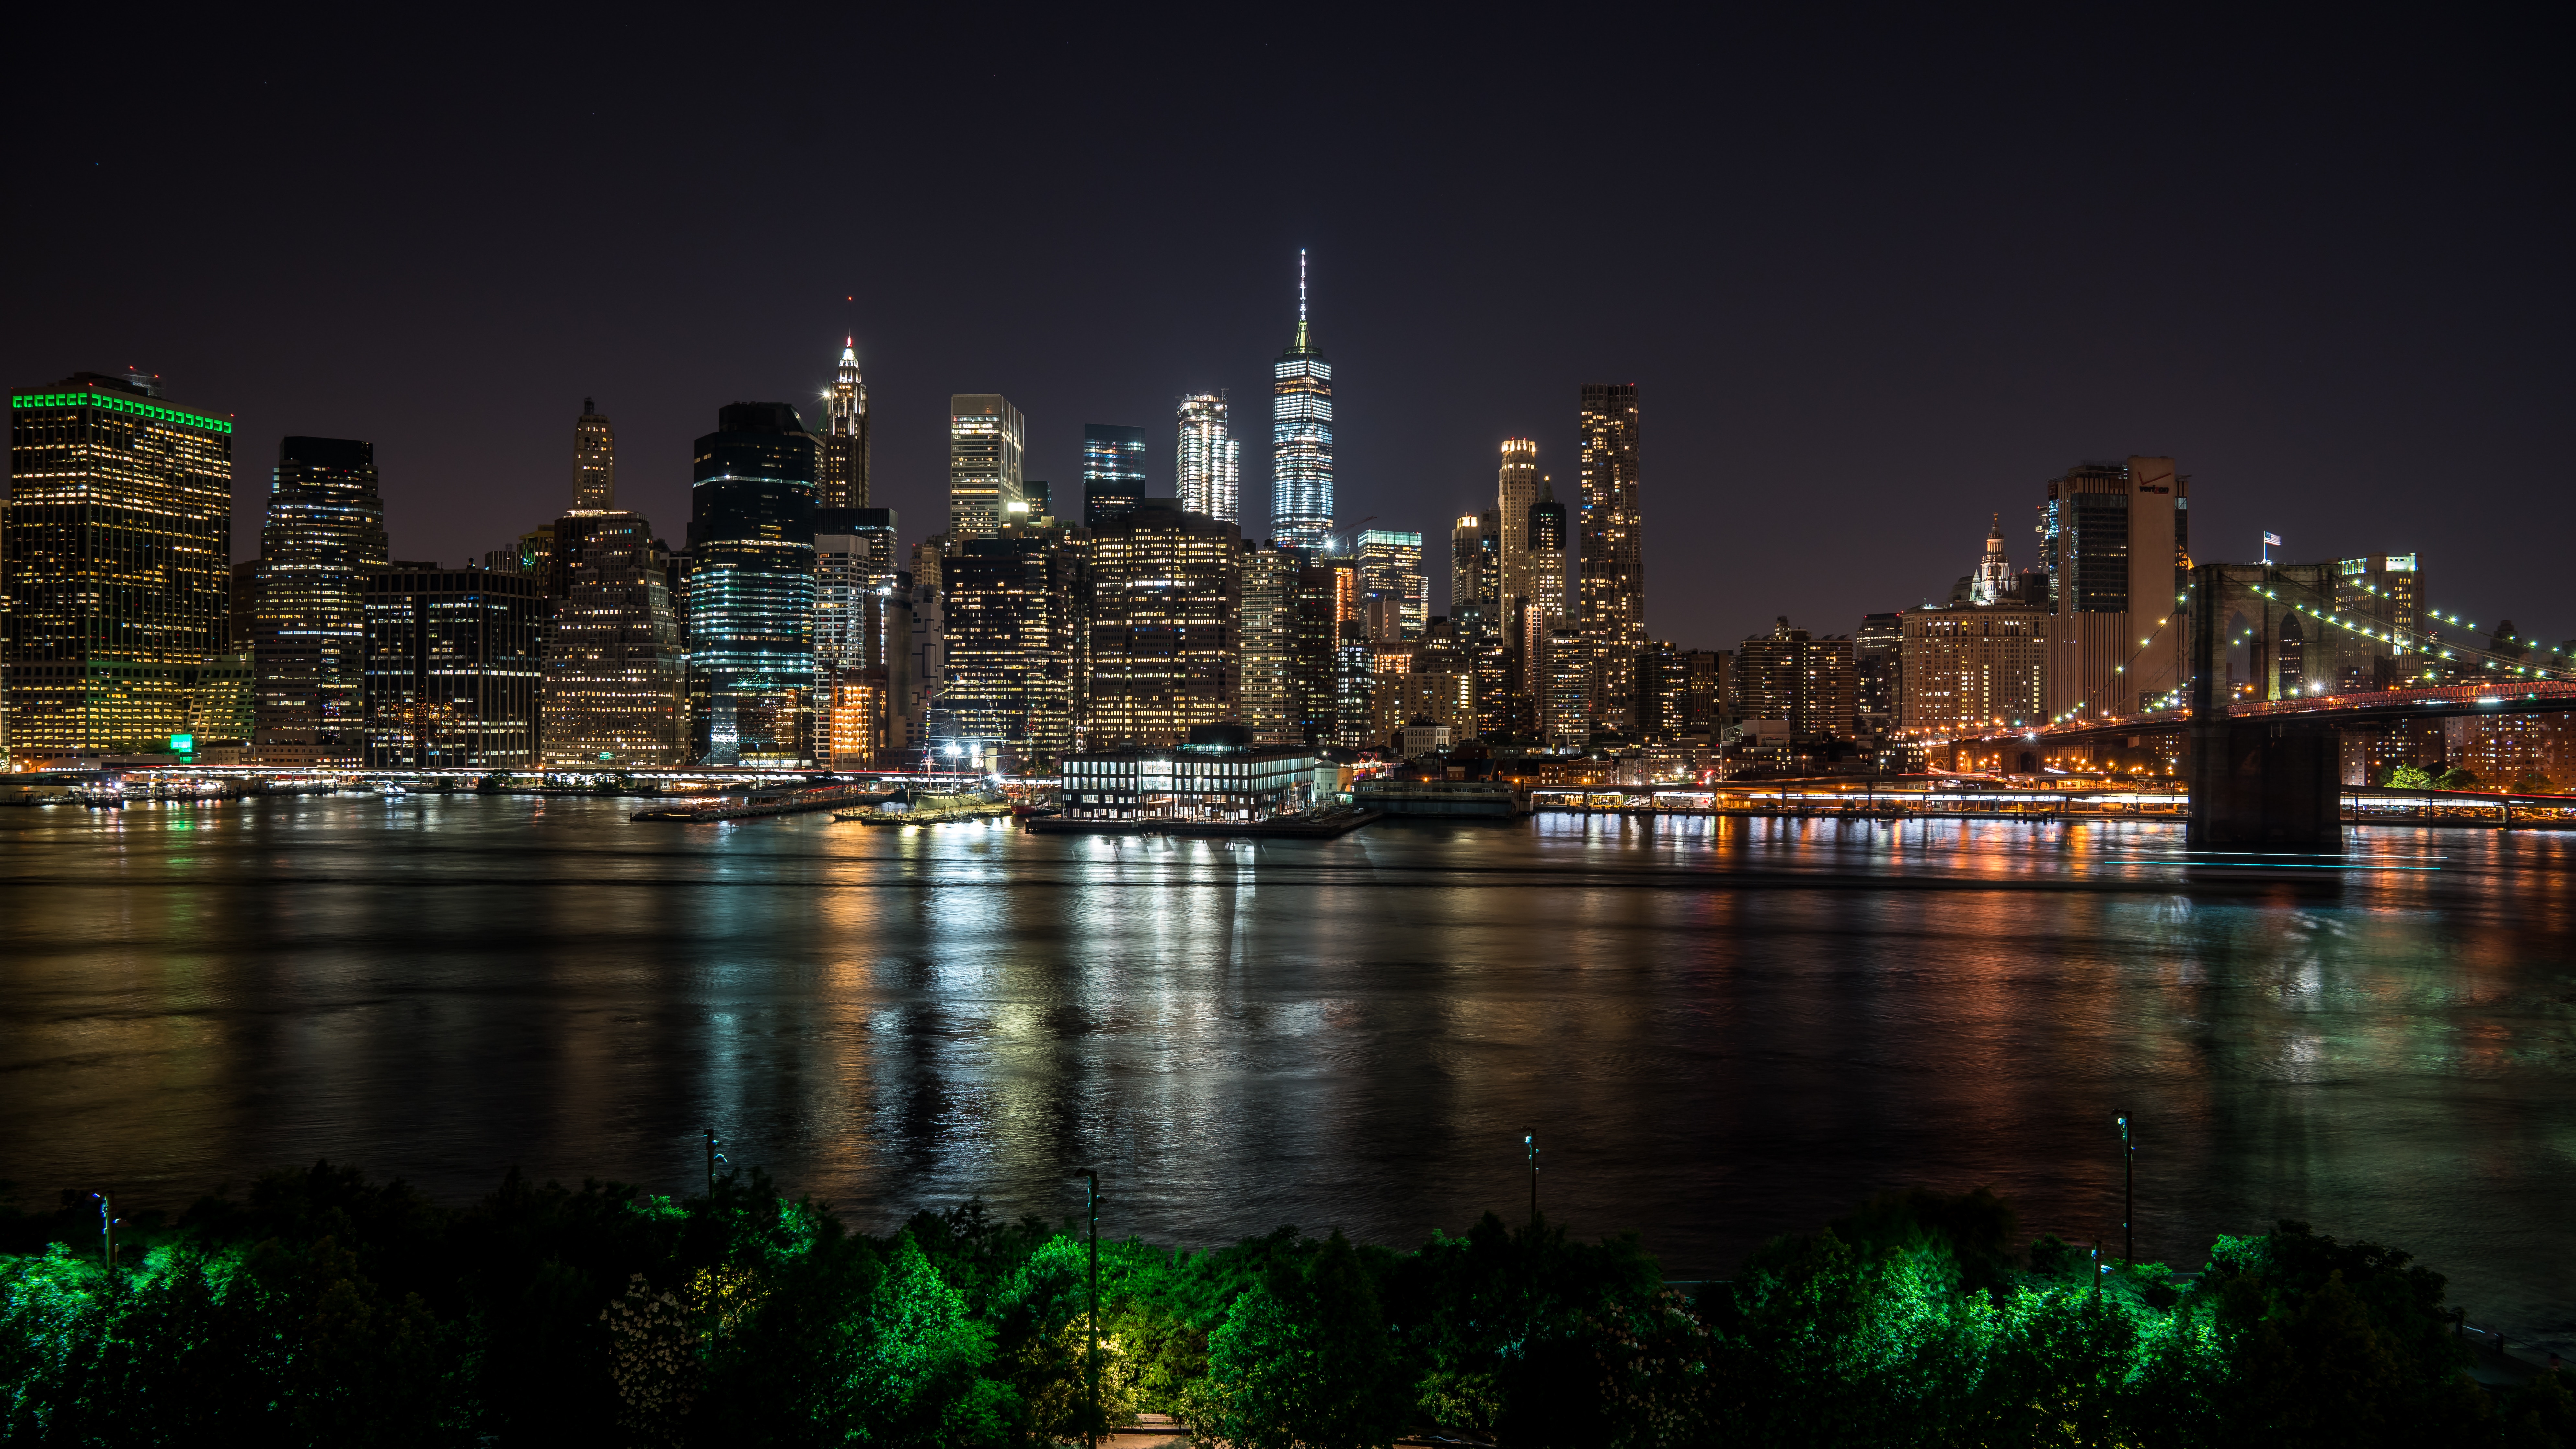 121423 download wallpaper cities, usa, night city, skyscrapers, united states, panorama, new york screensavers and pictures for free